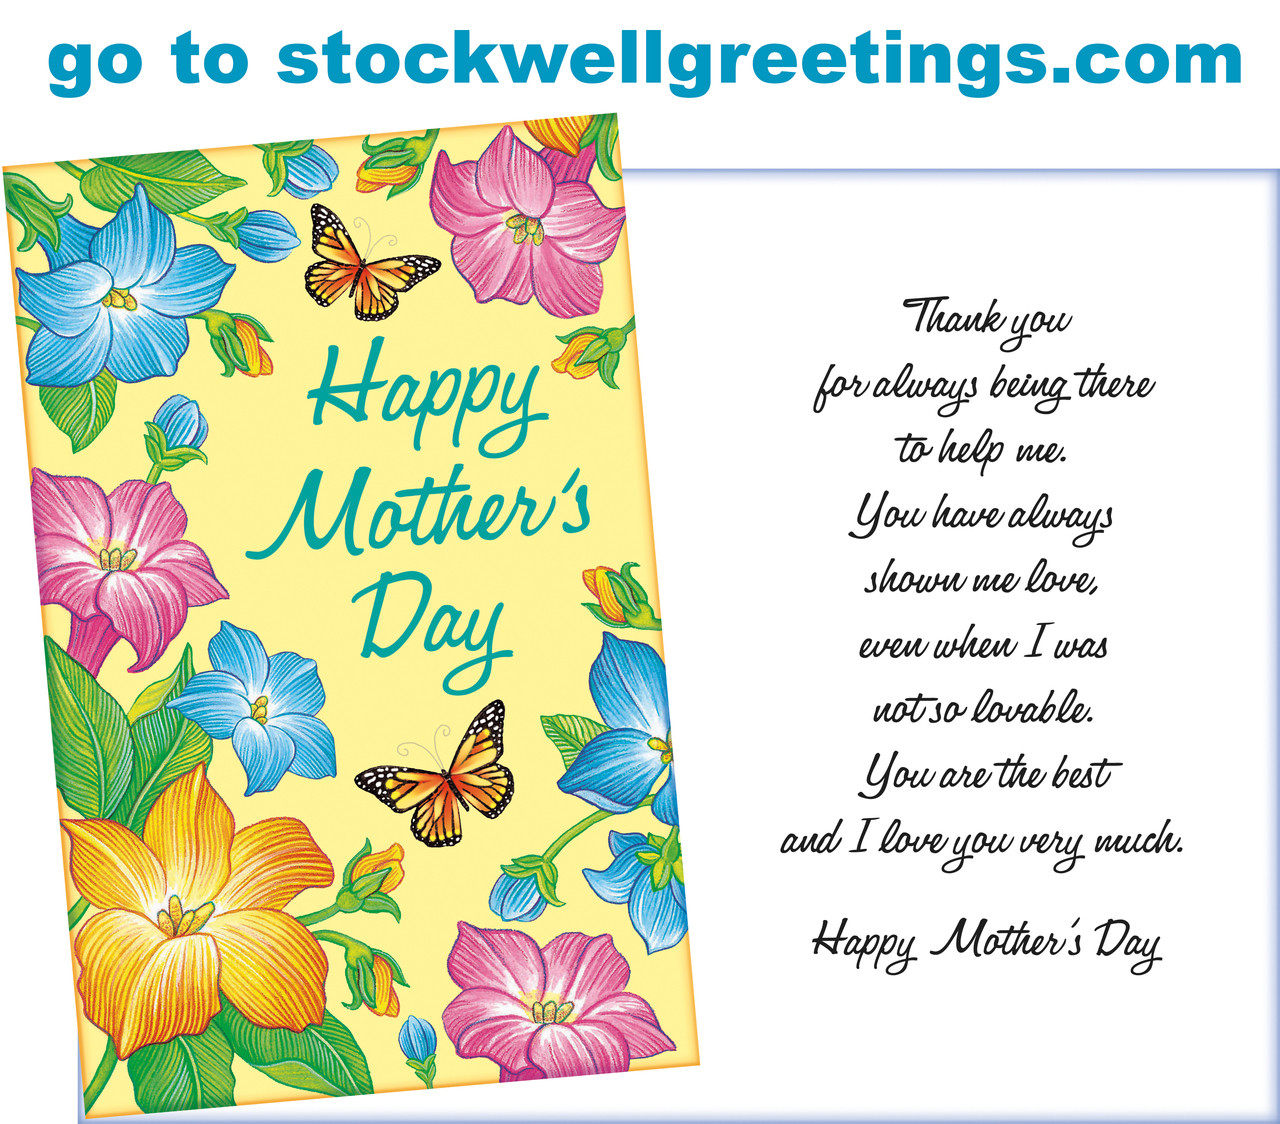 wholesale greeting cards, discount greeting cards